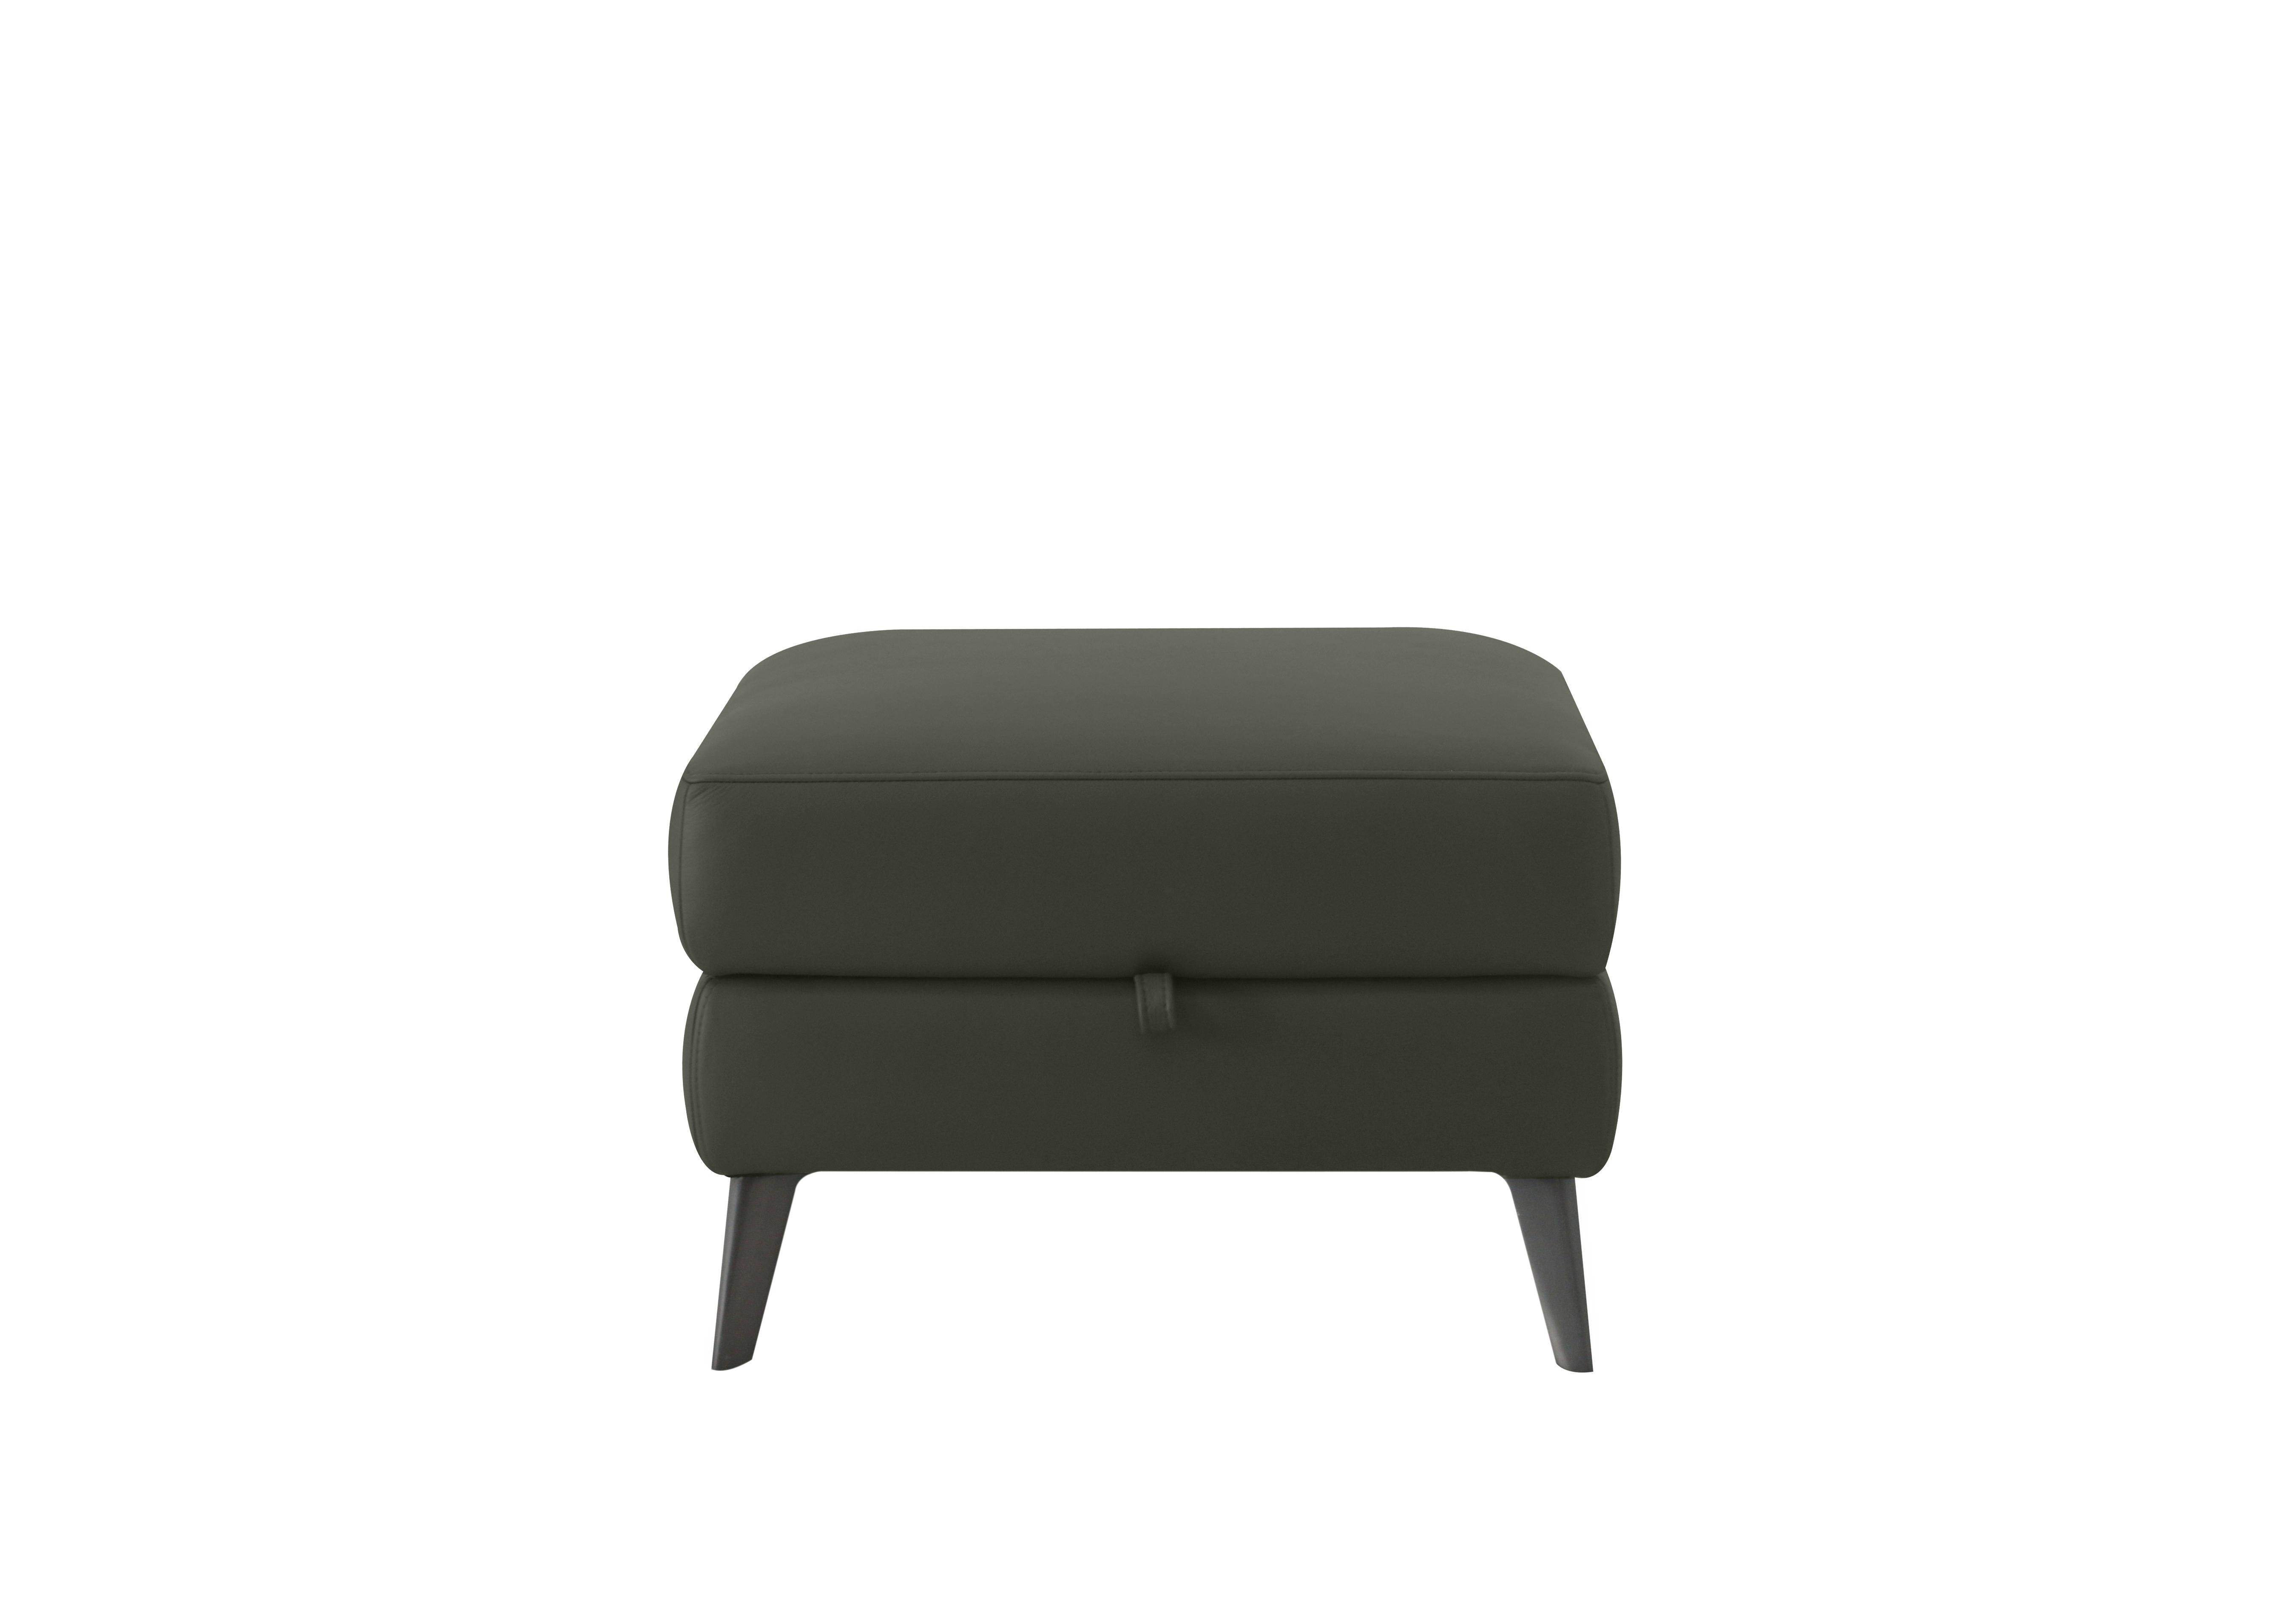 Logan Leather Storage Footstool in Nn-570e Olive Green on Furniture Village